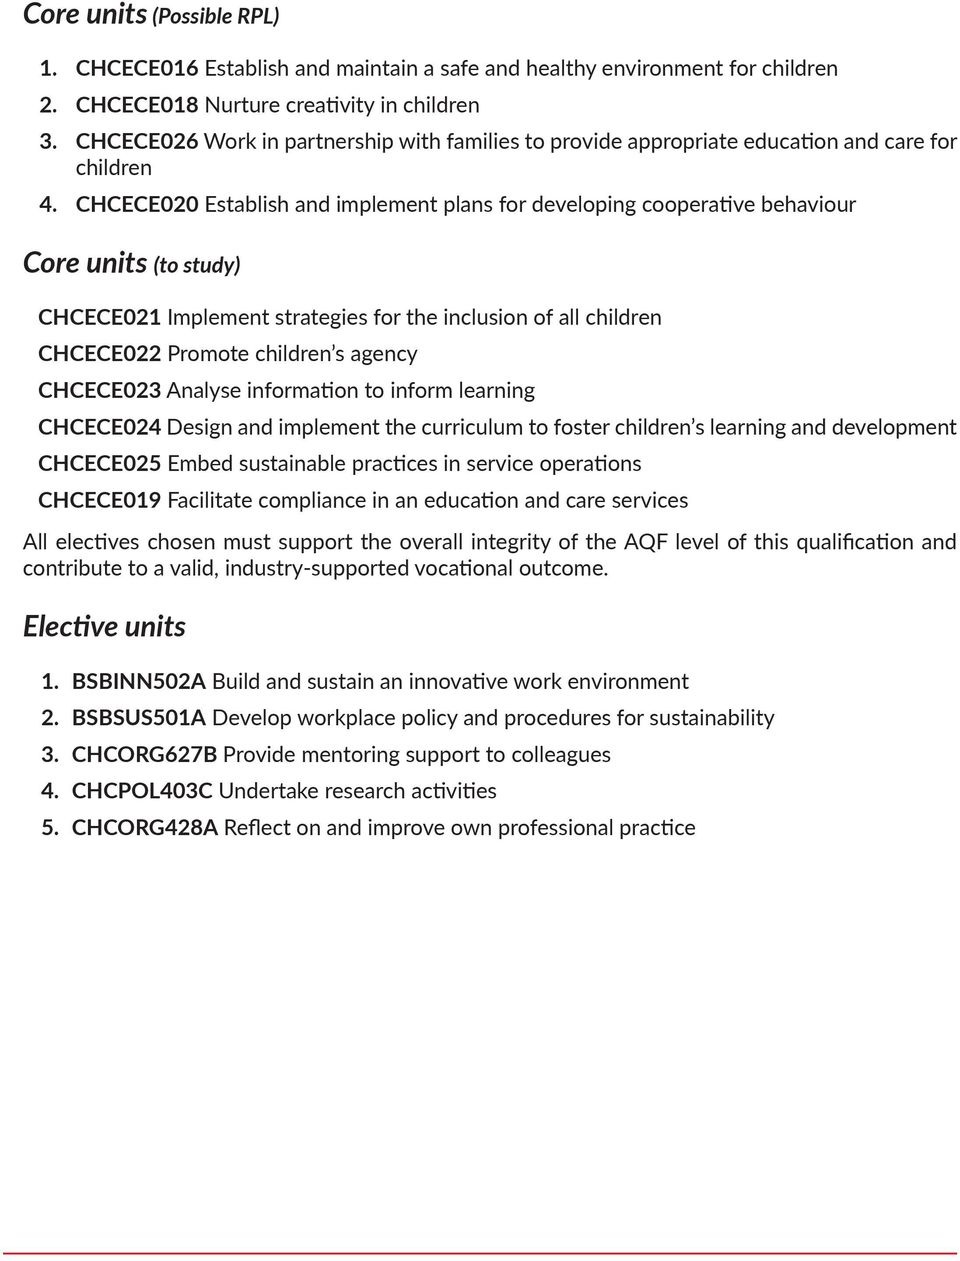 CHCECE020 Establish and implement plans for developing cooperative behaviour Core units (to study) CHCECE021 Implement strategies for the inclusion of all children CHCECE022 Promote children s agency